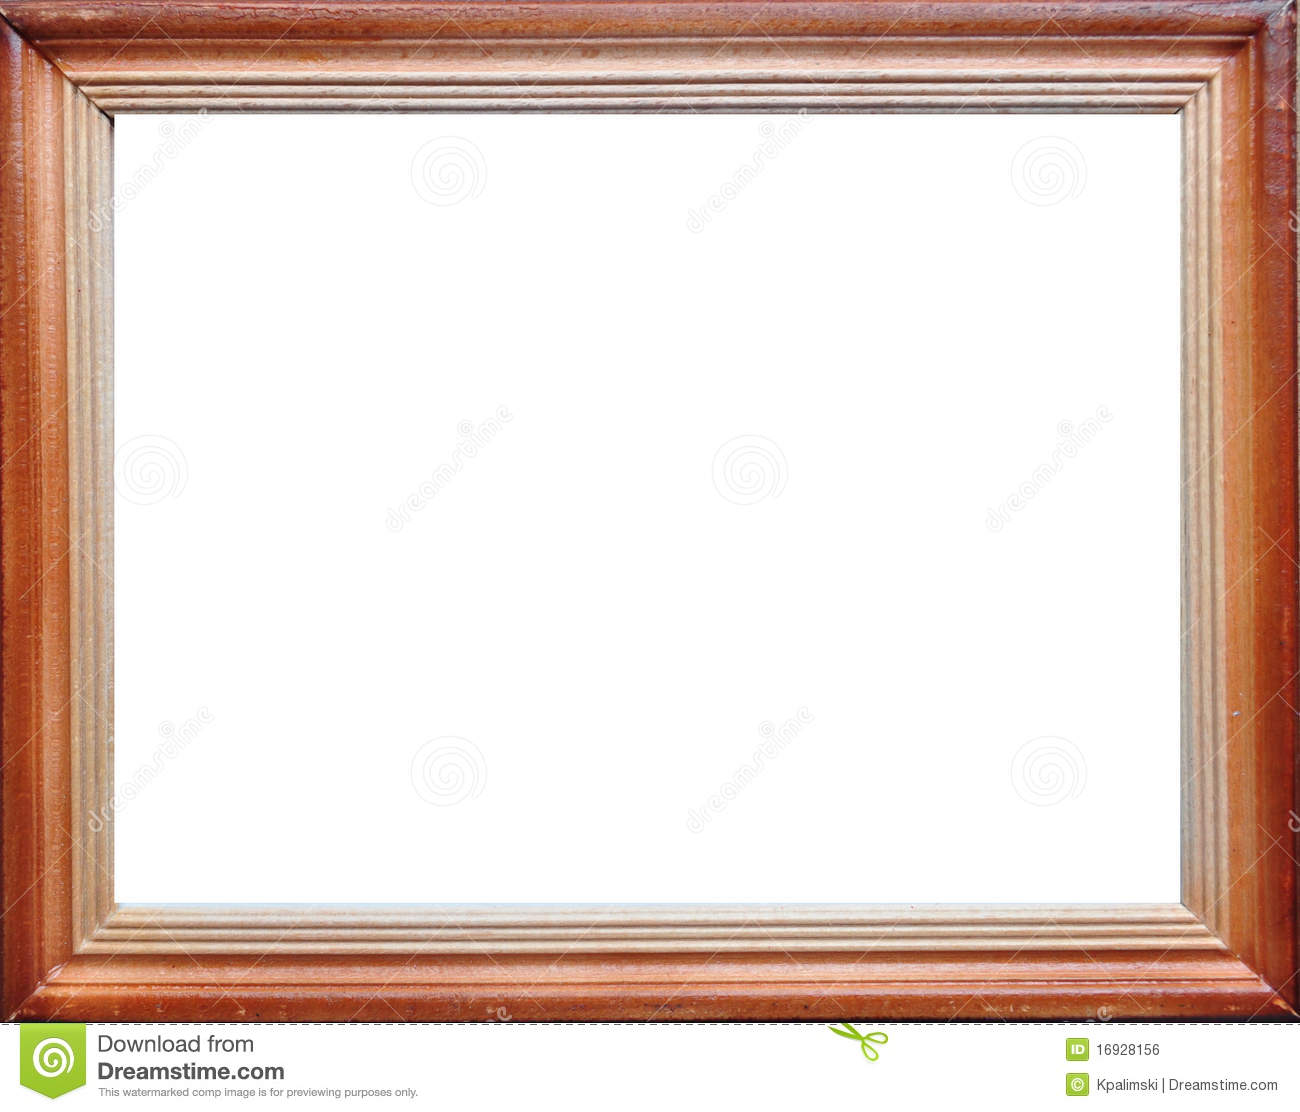 Wooden picture frame clipart – ciij 